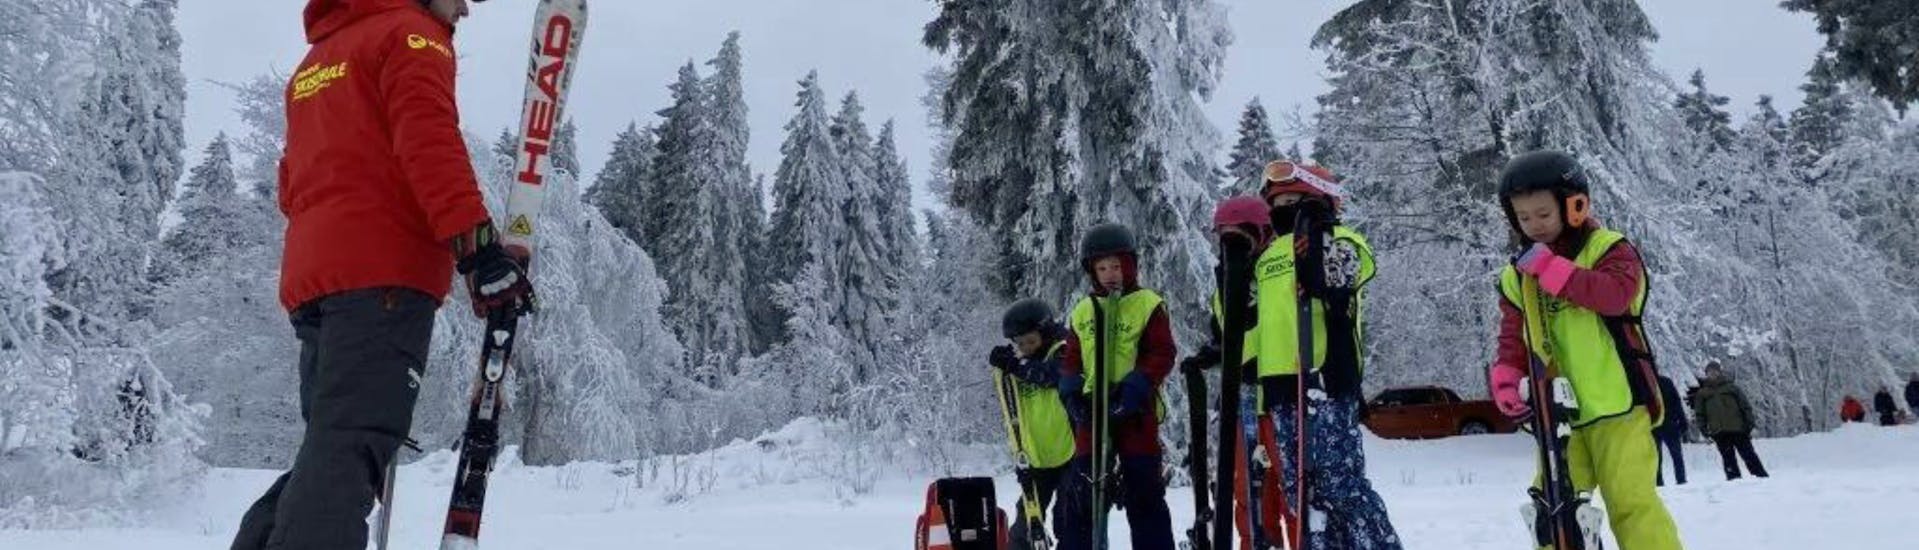 An instructor and kids having fun during their ski lesson at Ski school Sportwelt Oberhof.